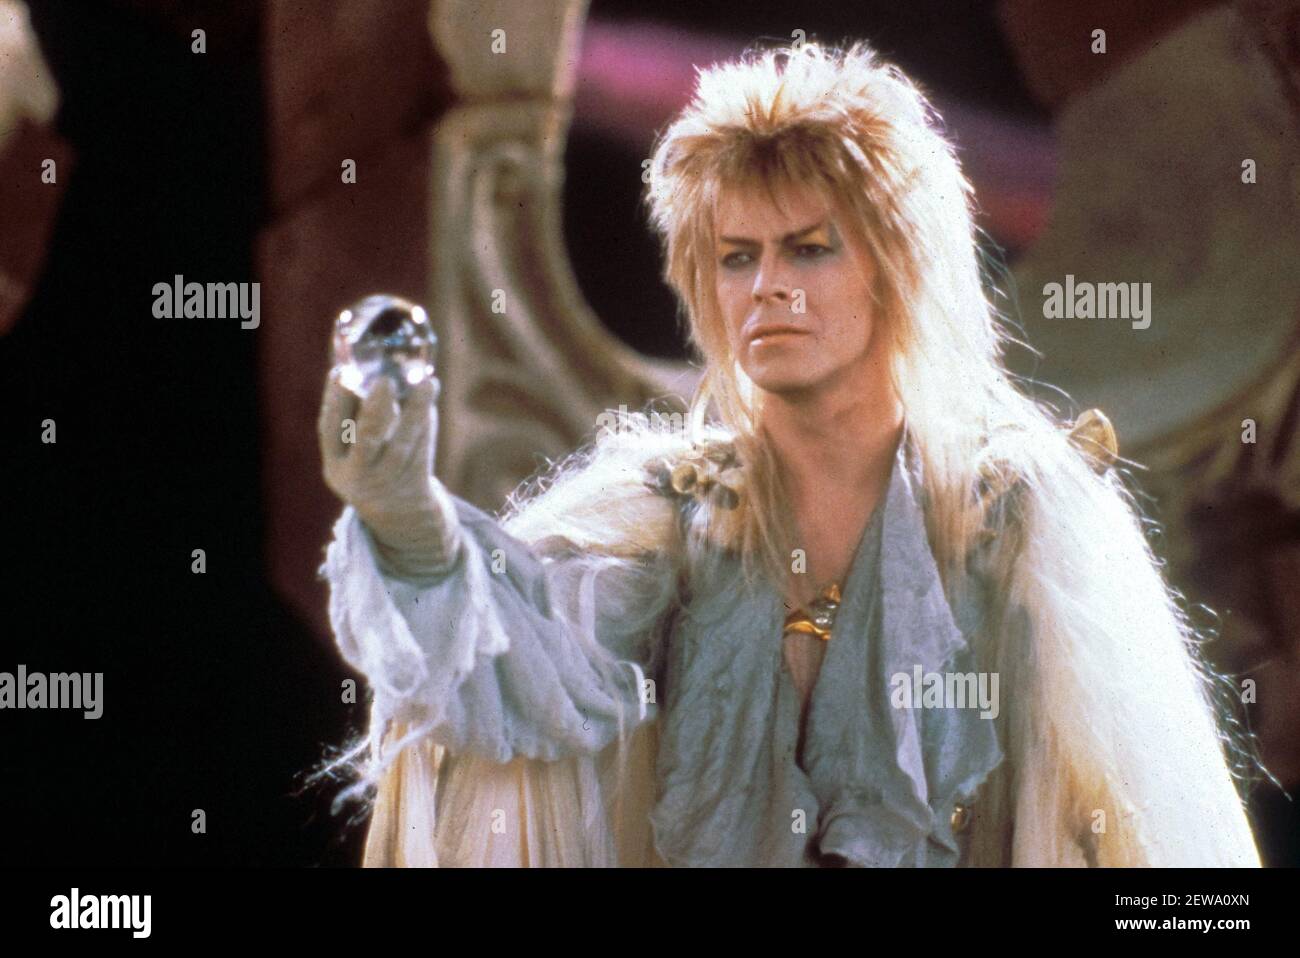 David Bowie, "Labyrinth" (1986) Tri-star Pictures. Photo Credit: Tri-star Pictures/The Hollywood Archive-  File Reference # 34082-847THA Stock Photo